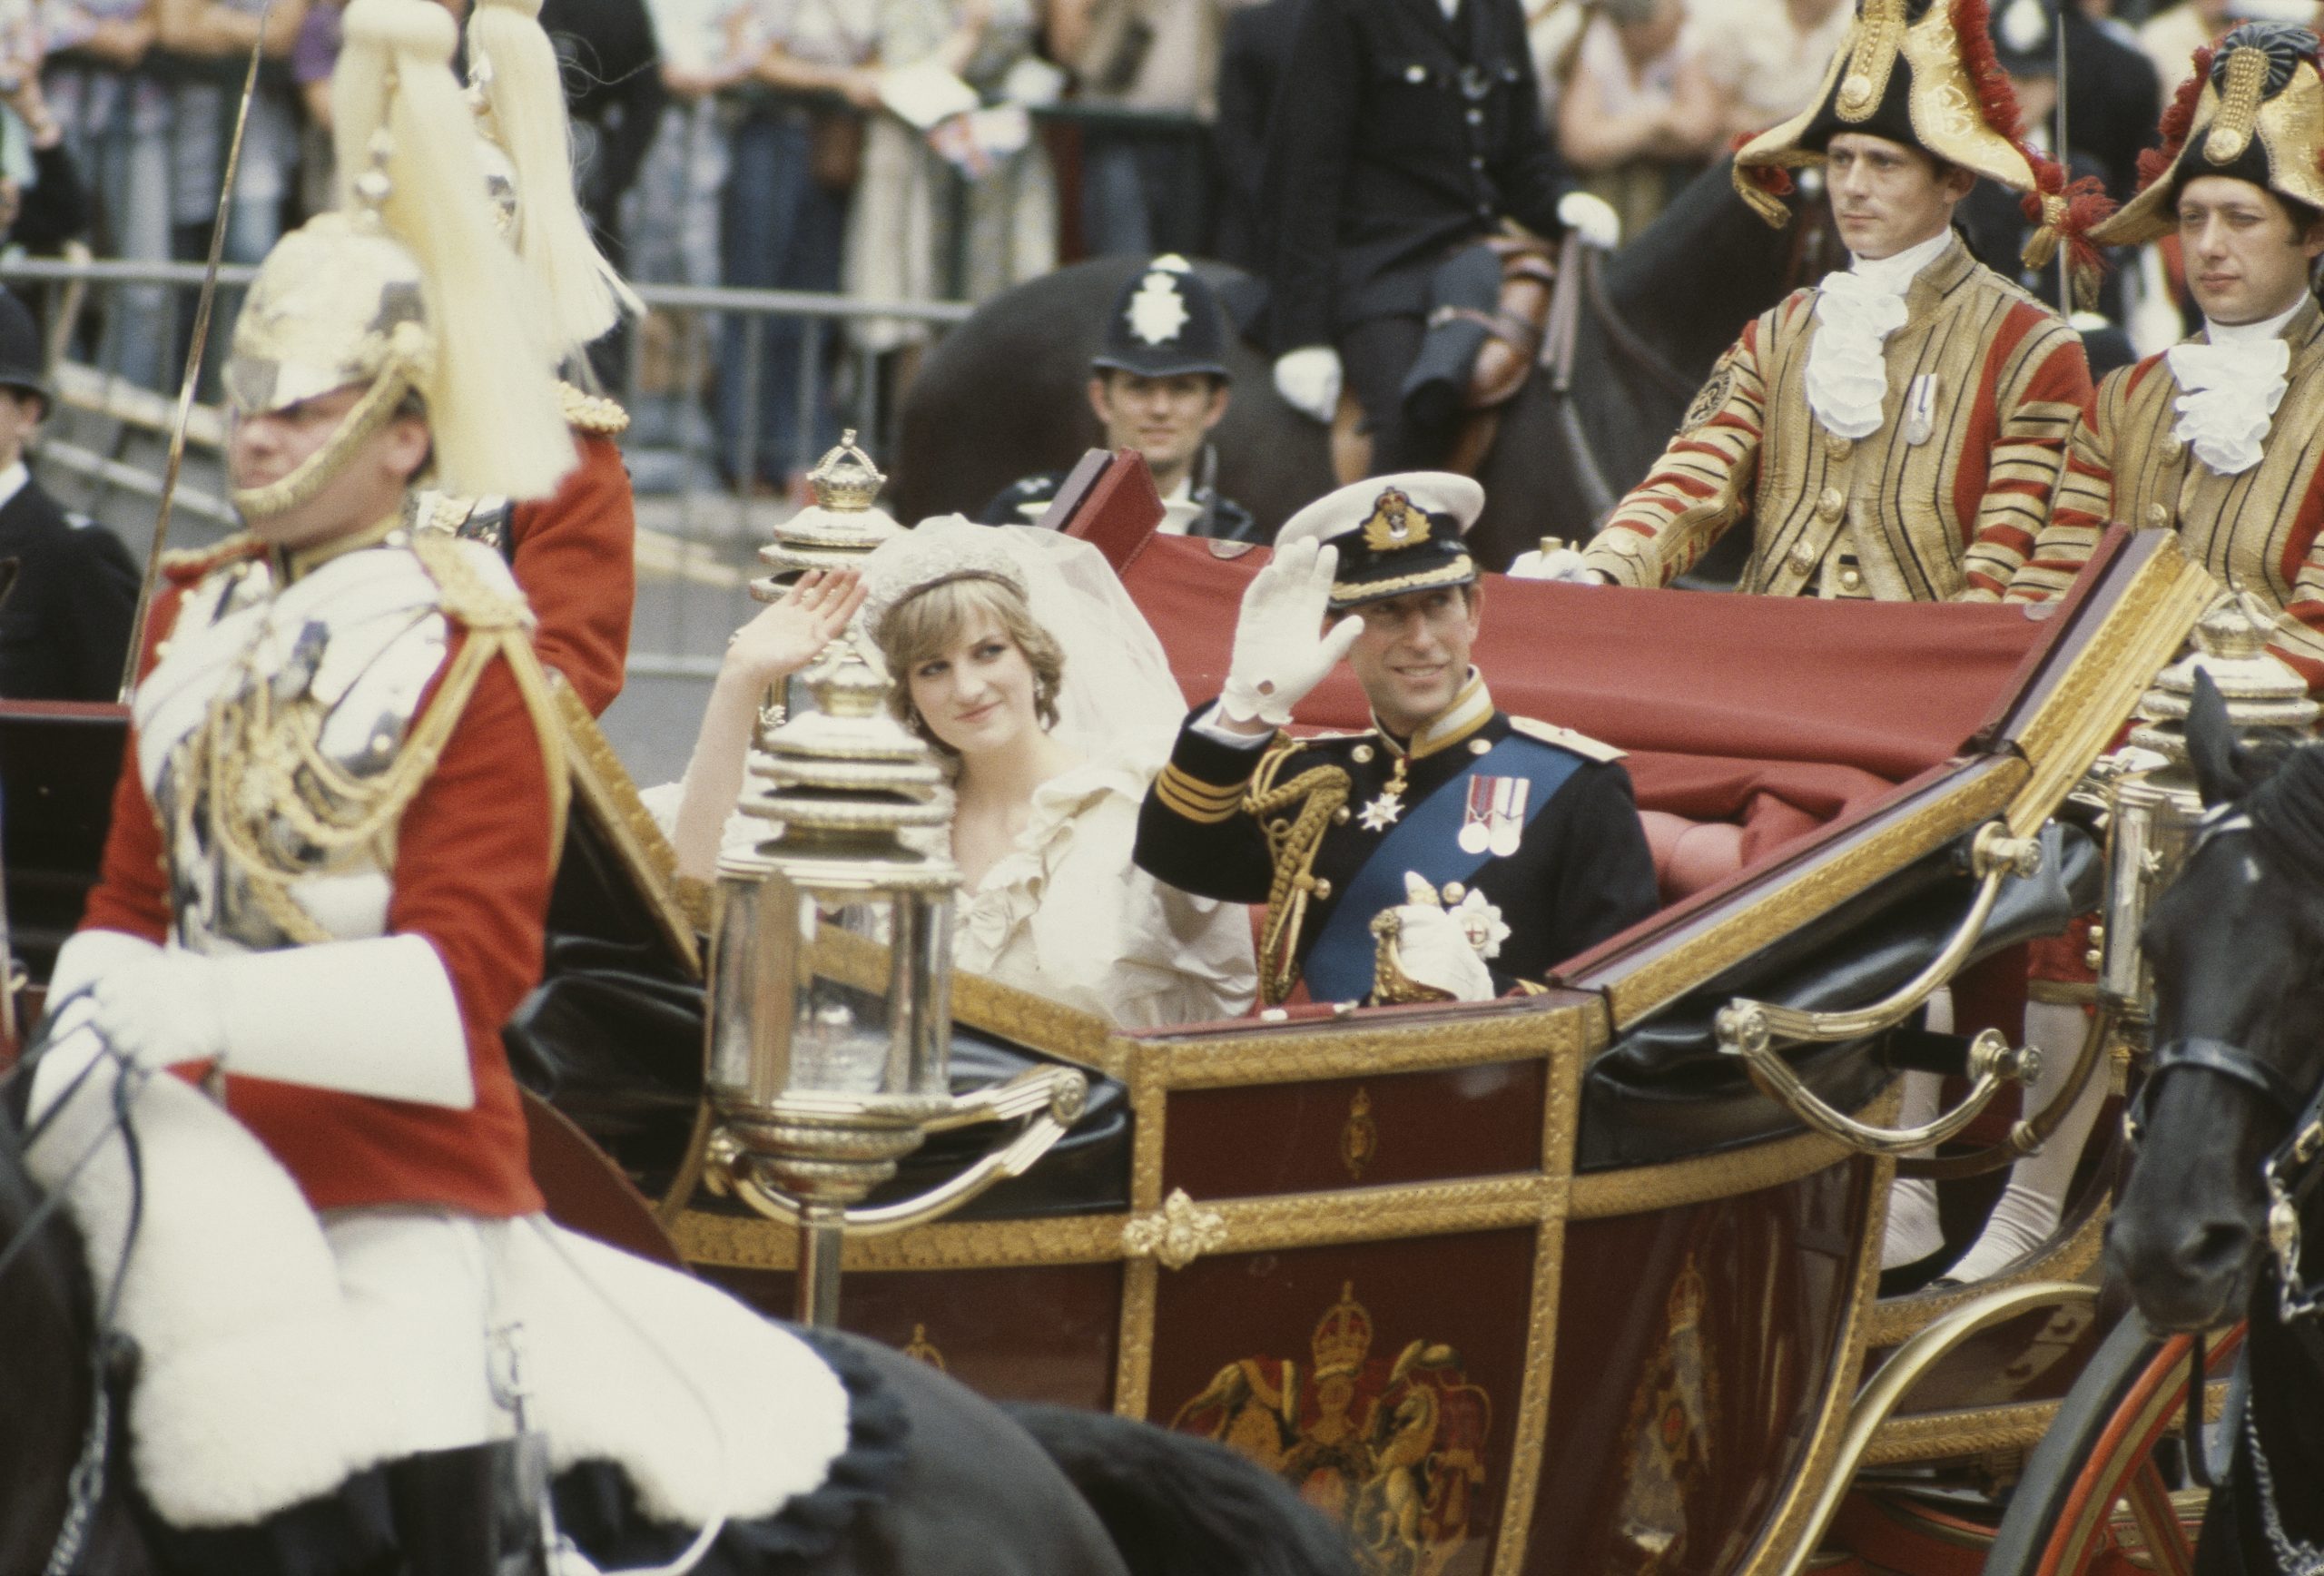 Charles, Prince of Wales, and his wife, Princess Diana (1961 - 1997), wave to the crowds following their wedding ceremony